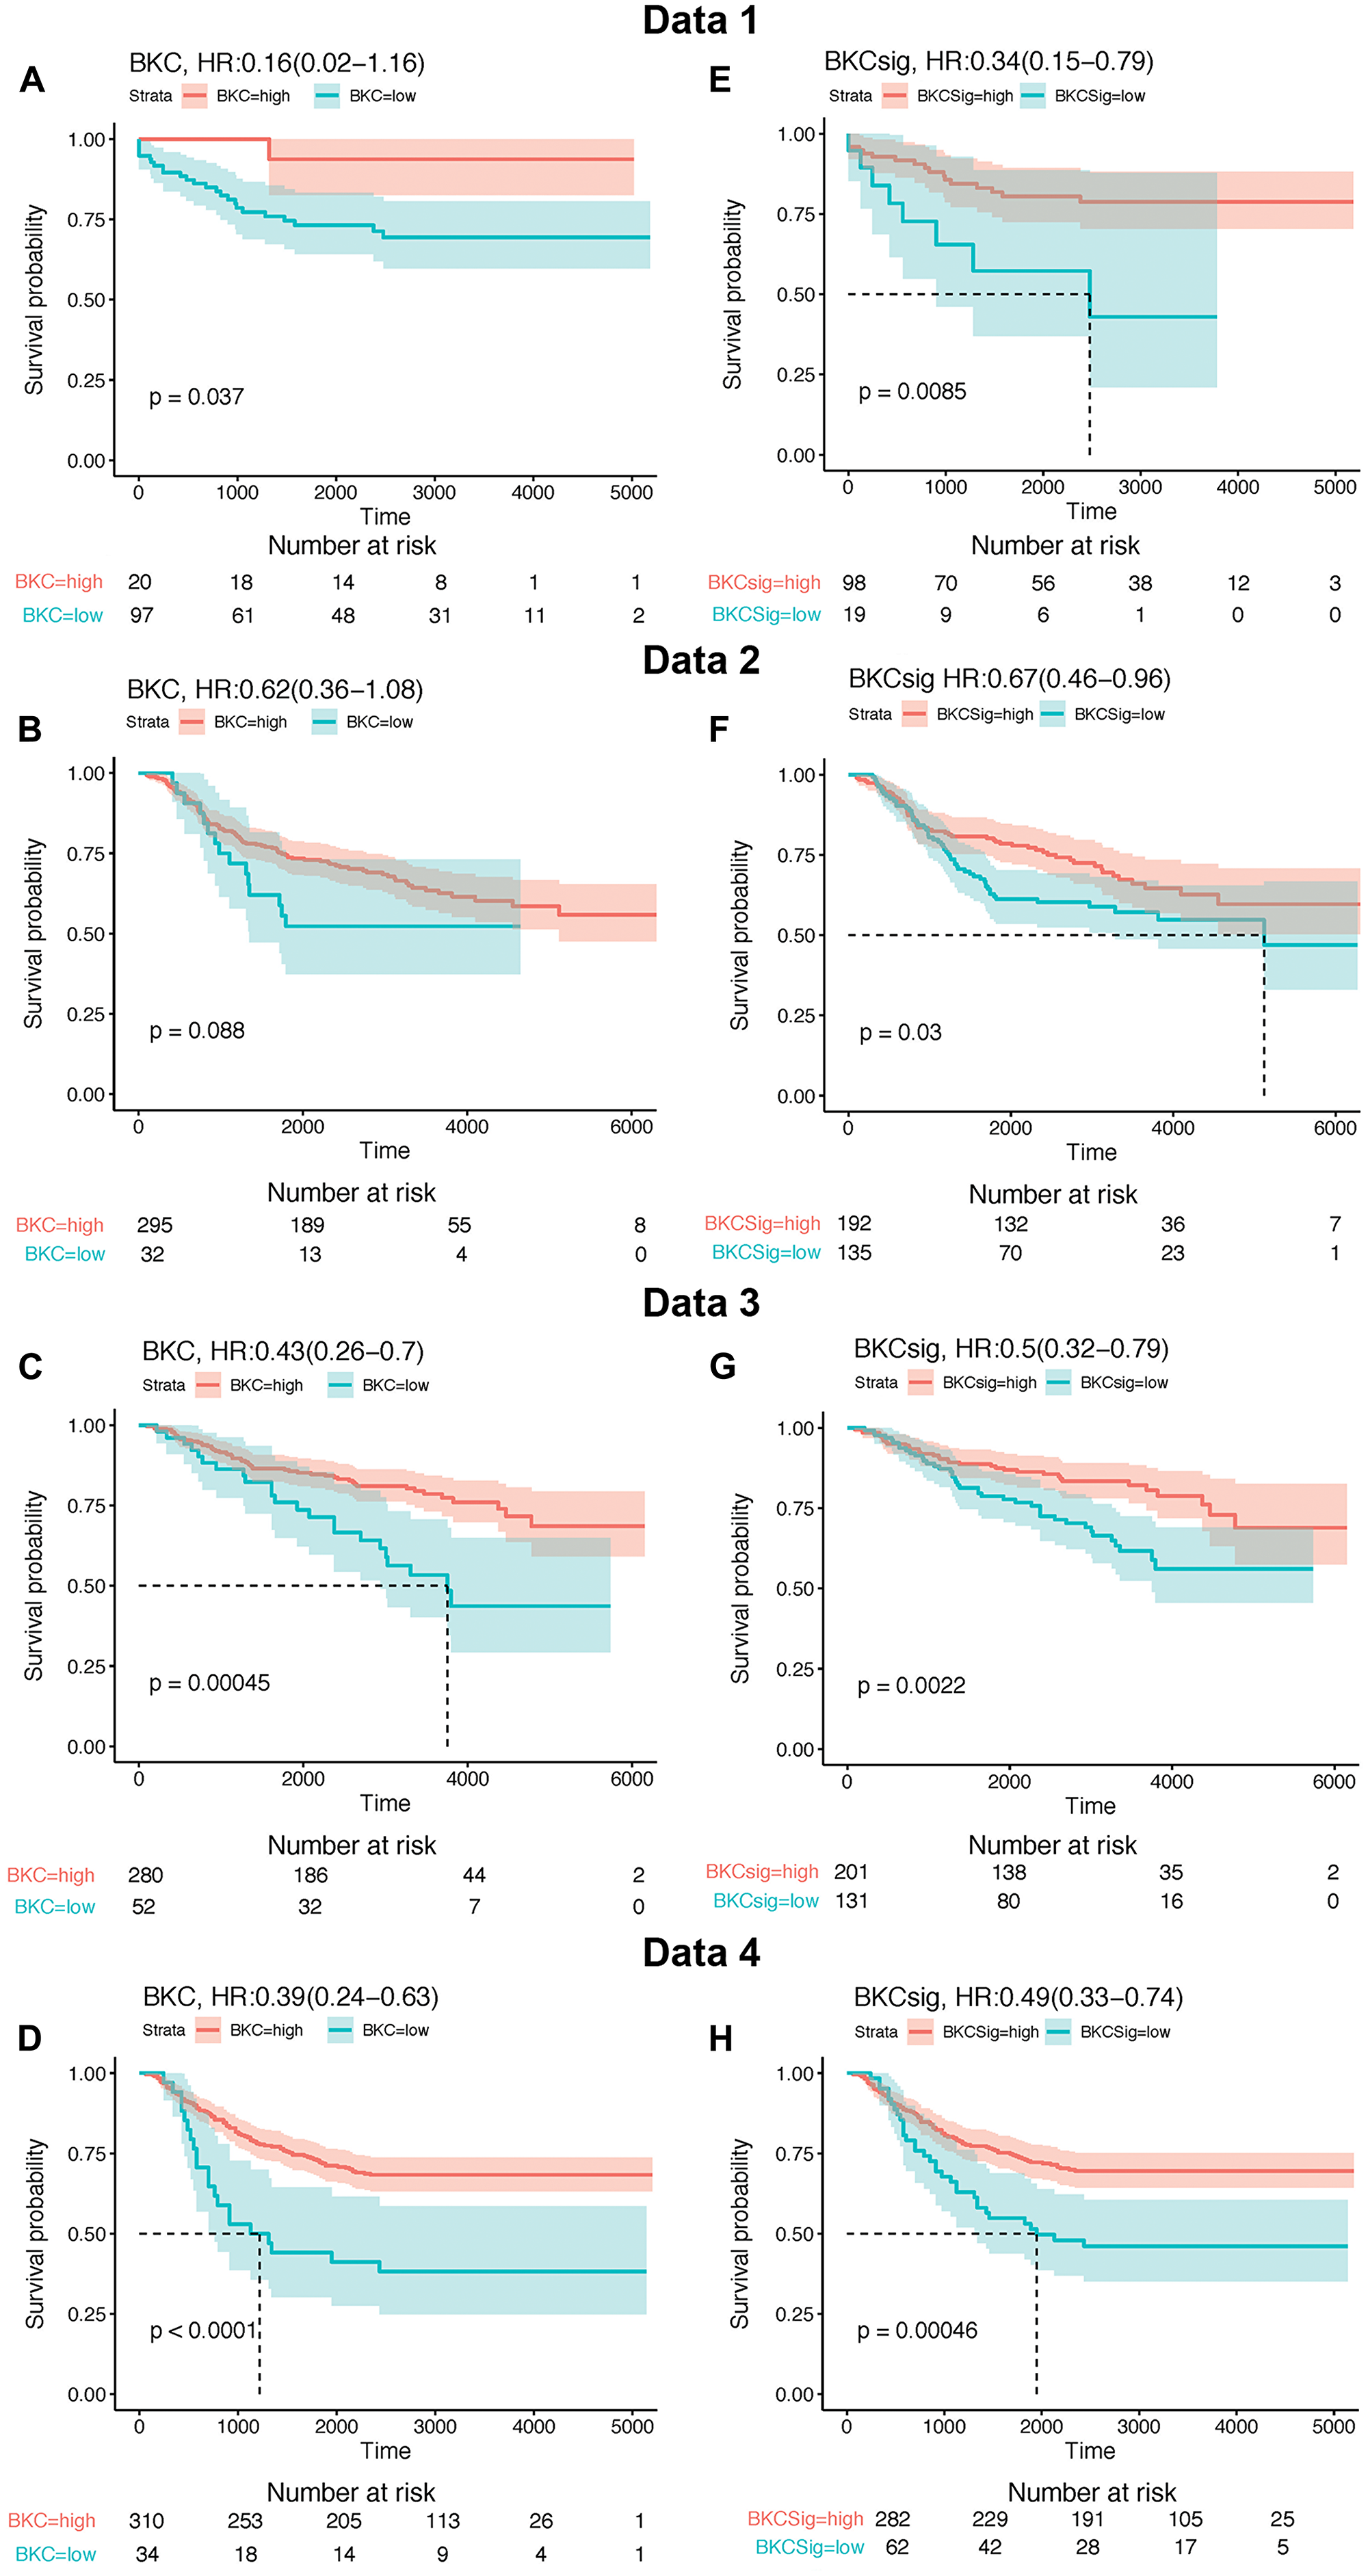 Kaplan–Meier (KM) survival analysis of BKC gene and BKCsig gene signature using four independent publicly available breast cancer relapse free survival patient cohorts named as Data 1, Data 2, Data 3, and Data 4.